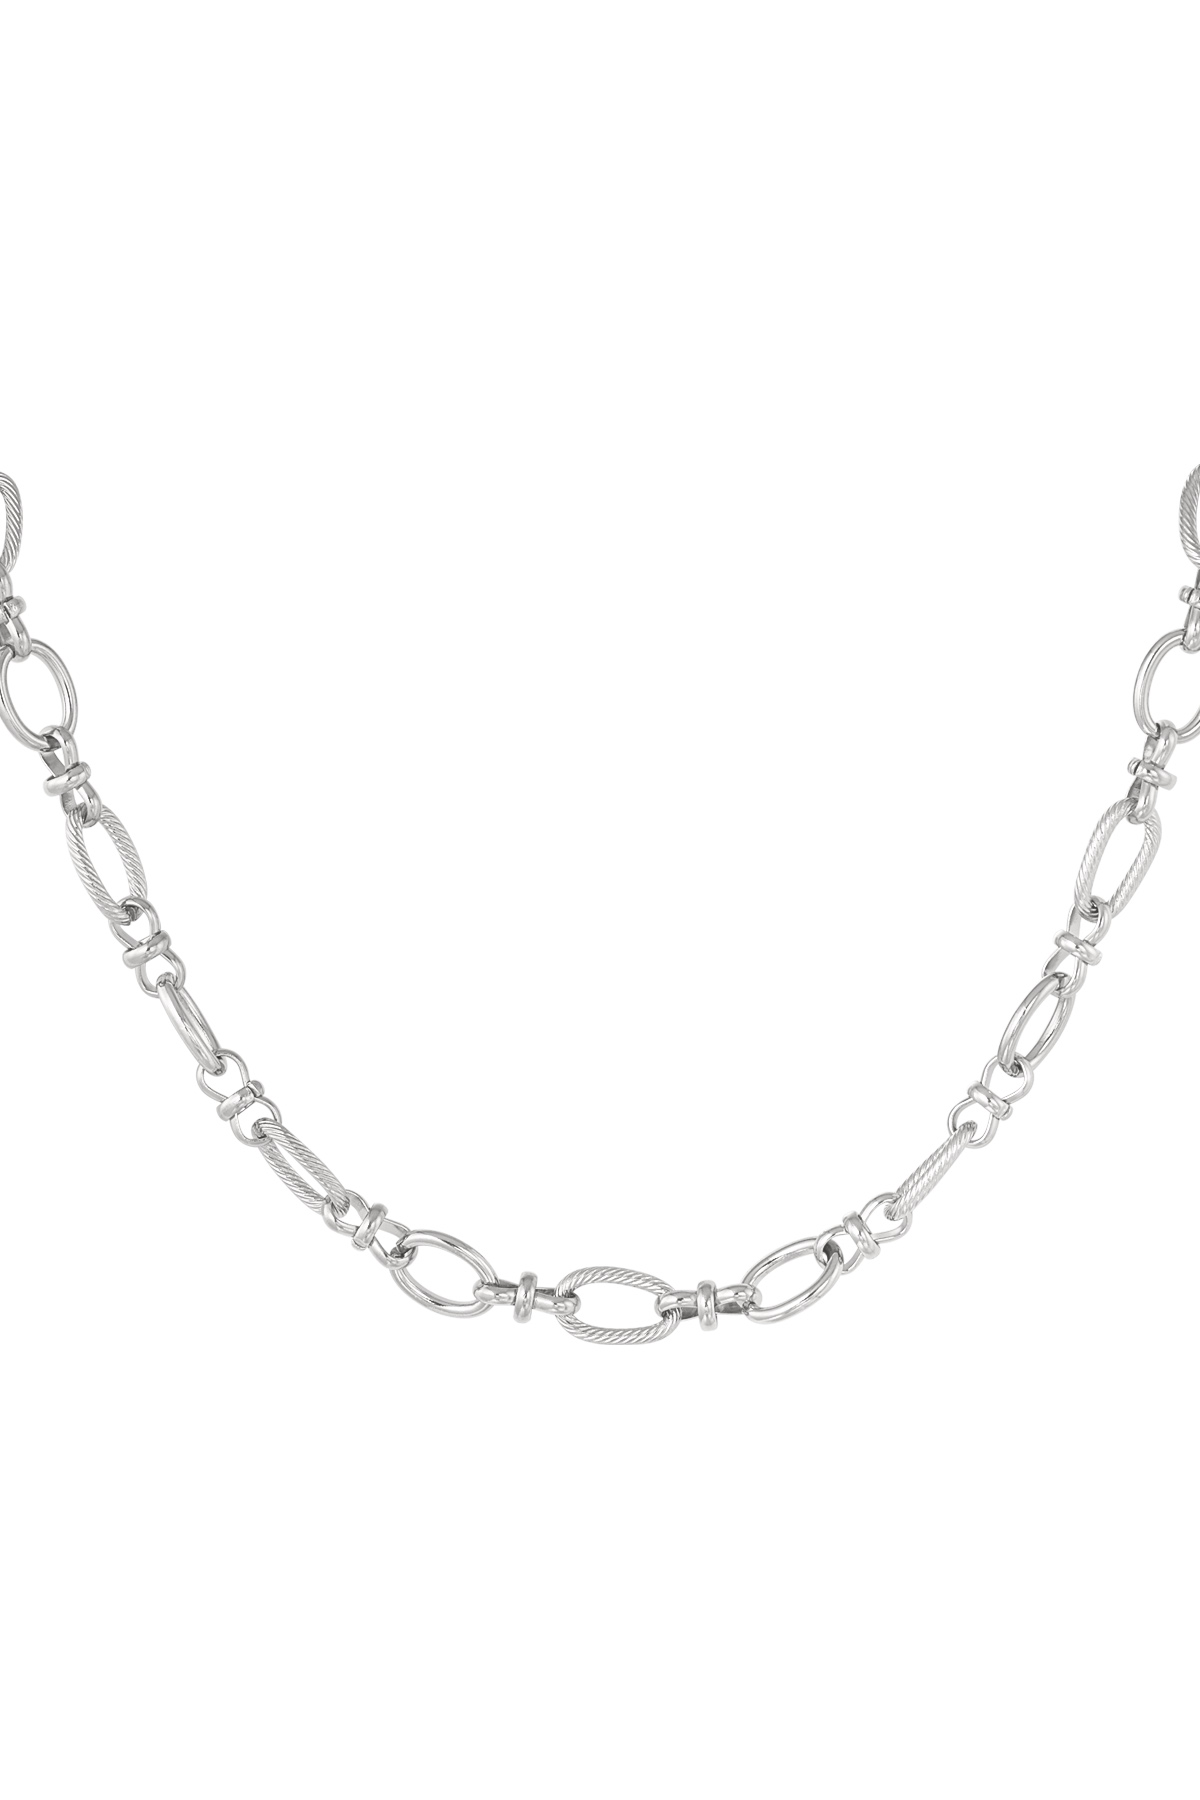 Link chain different links - silver